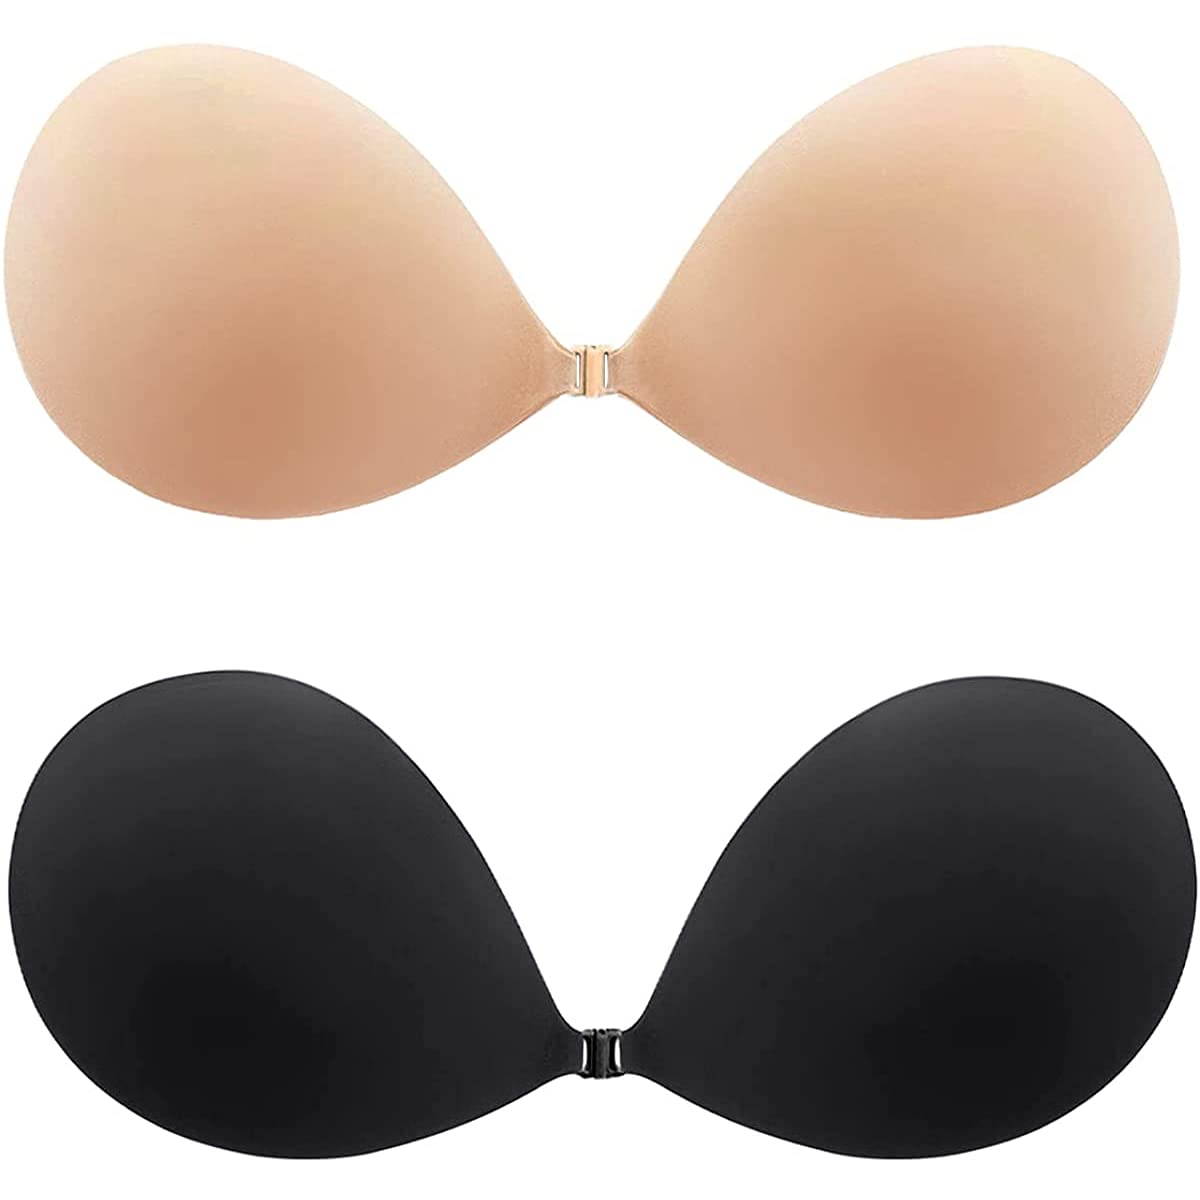 Strapless Front Buckle Push Up Bras for Women,Wireless Sexy Anti-Slip  Invisible Lift Bras 